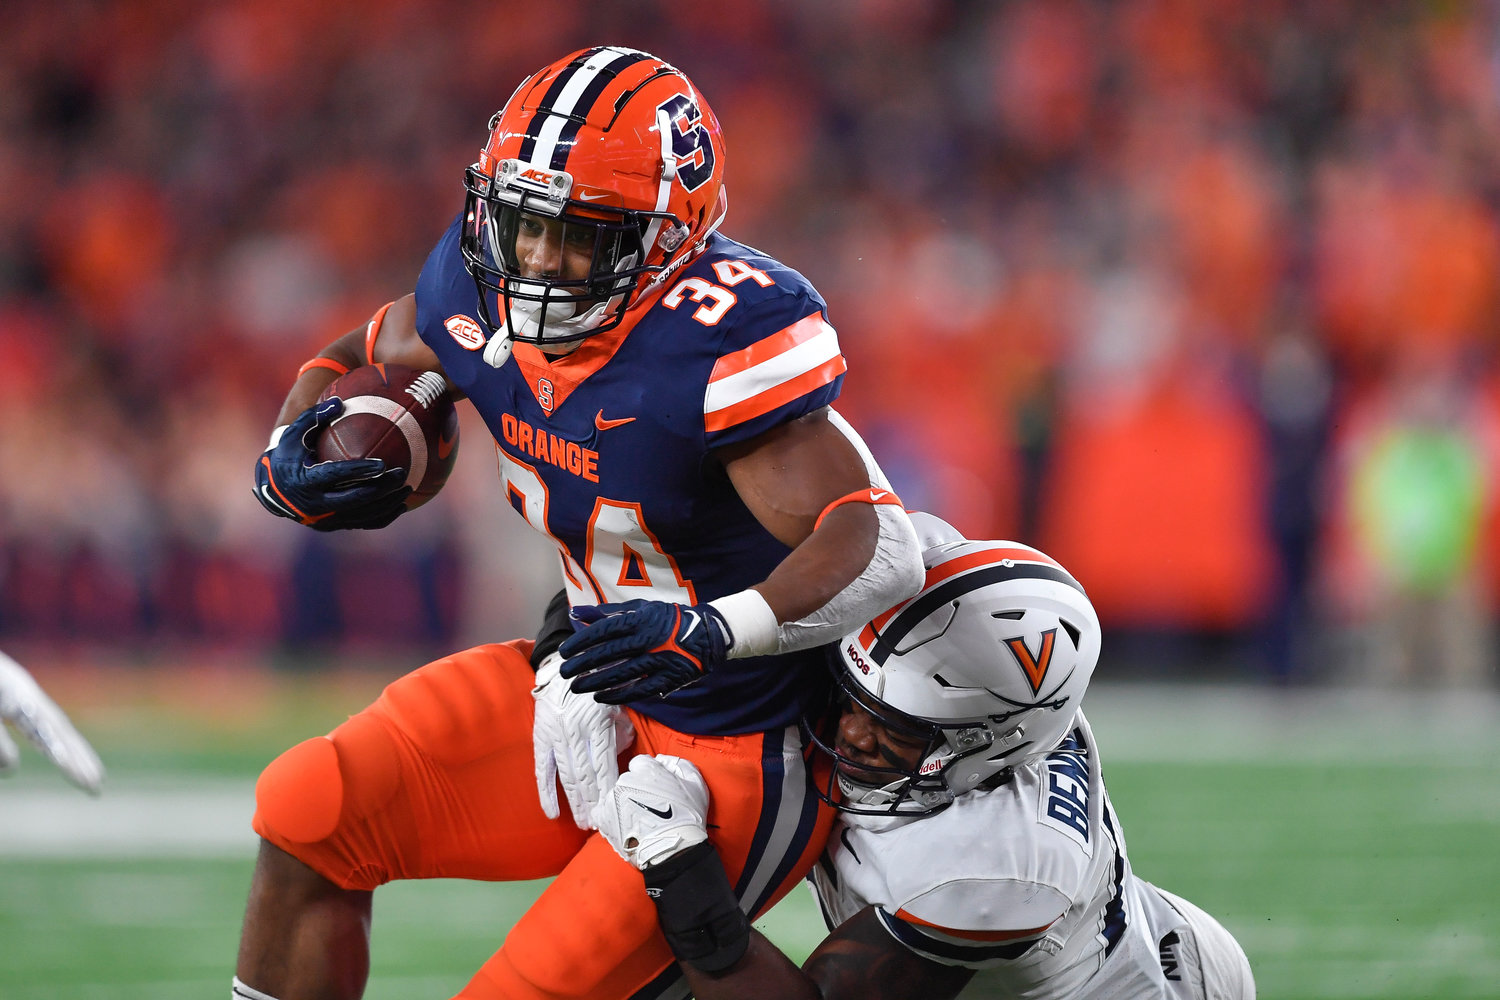 Syracuse running back Sean Tucker (34) is tackled by Virginia linebacker Chico Bennett Jr. (15) during the first half on Friday night in Syracuse.